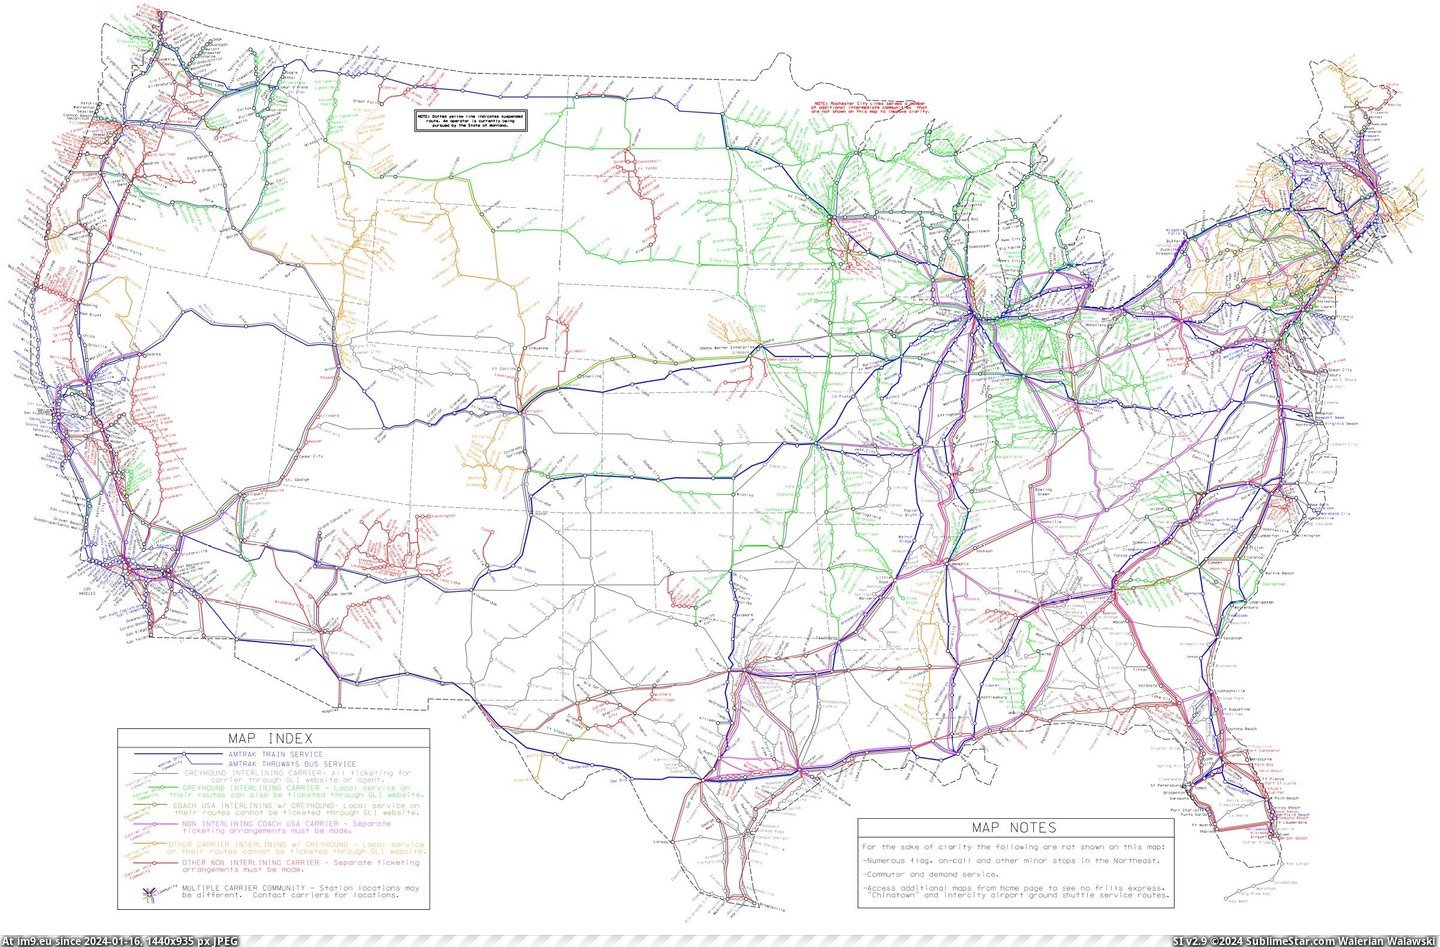 #Bus #Amtrak #Routes [Dataisbeautiful] US Bus and Amtrak routes Pic. (Image of album My r/DATAISBEAUTIFUL favs))